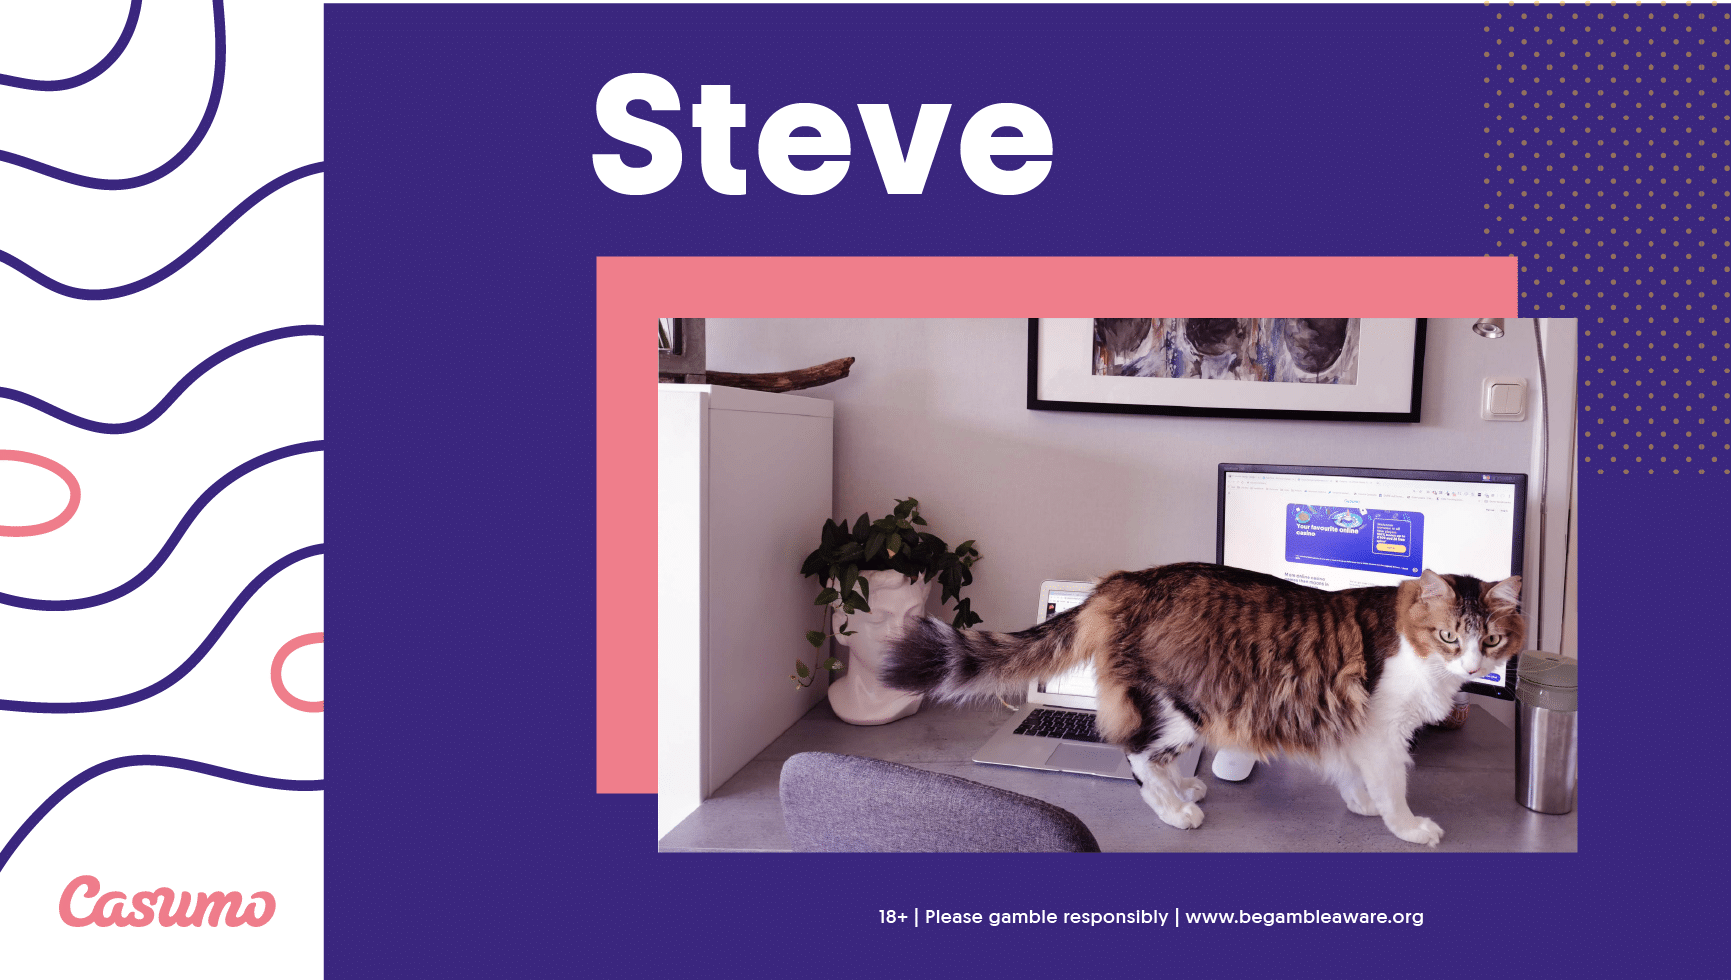 Steve shares his best working from home practices in this week’s interview.